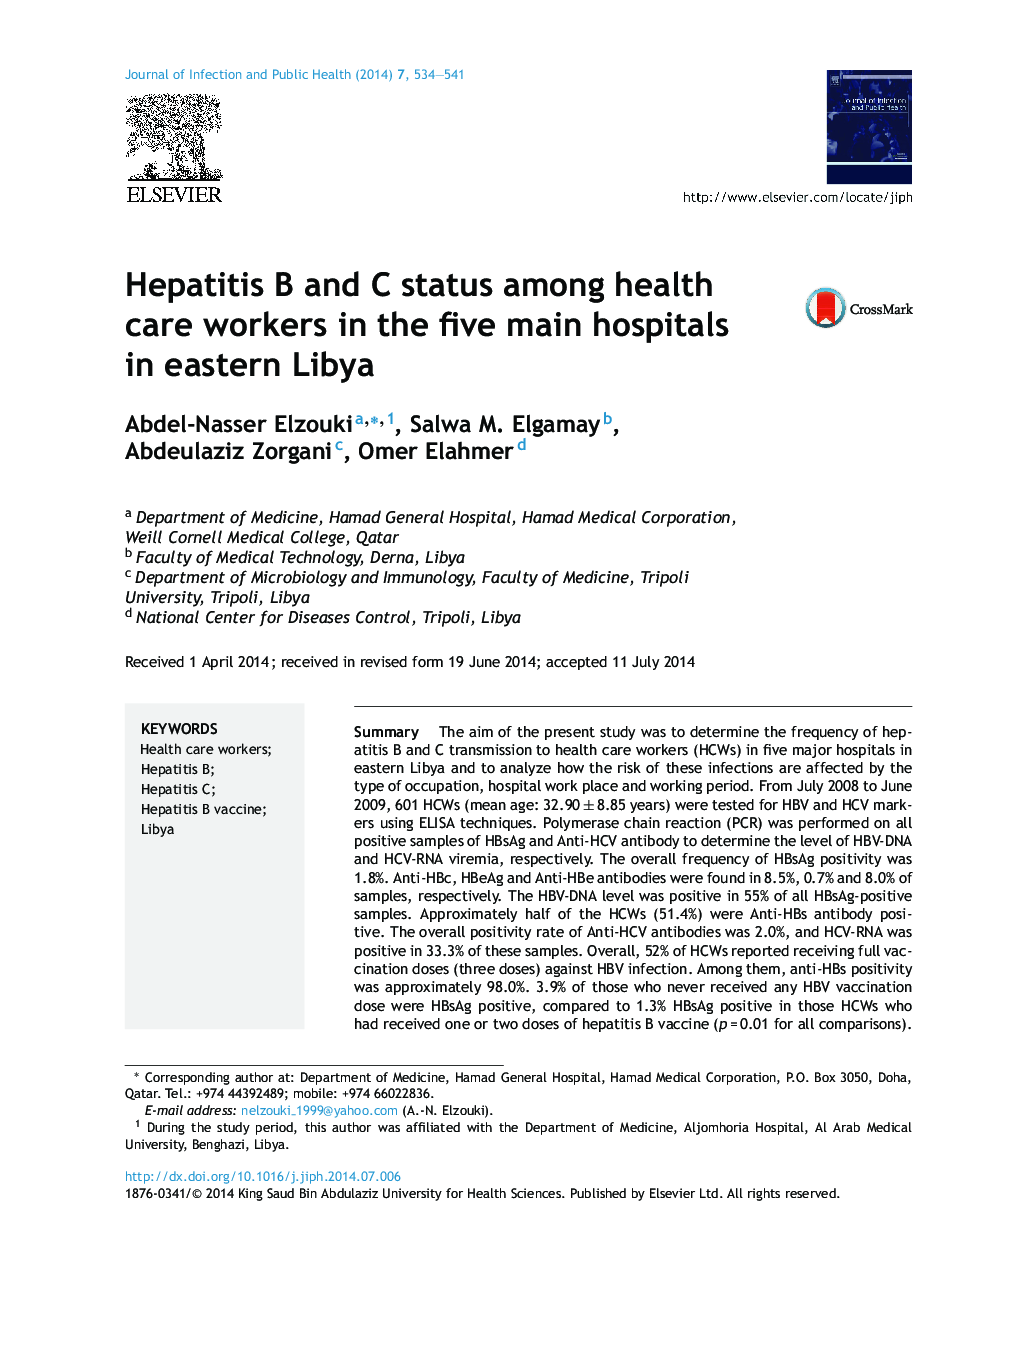 Hepatitis B and C status among health care workers in the five main hospitals in eastern Libya